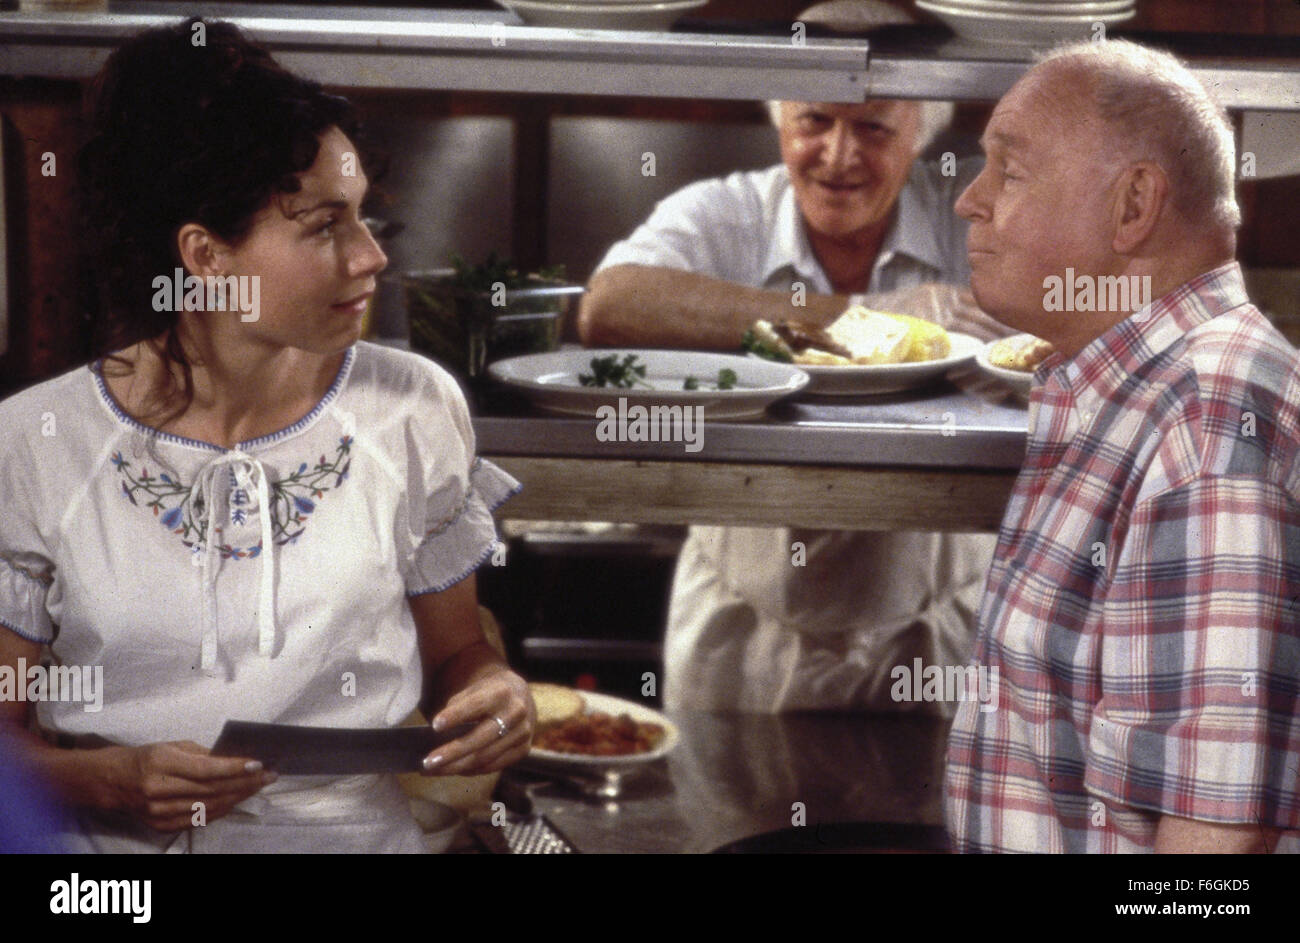 Apr 07, 2000; Chicago, IL, USA; (L-R): Actress MINNIE DRIVER stars as Grace Briggs, ROBERT LOGGIA as Angelo and CARROLL O'CONNOR as Marty in the Bonnie Hunt directed romantic comedy/drama, 'Return to Me.' Stock Photo